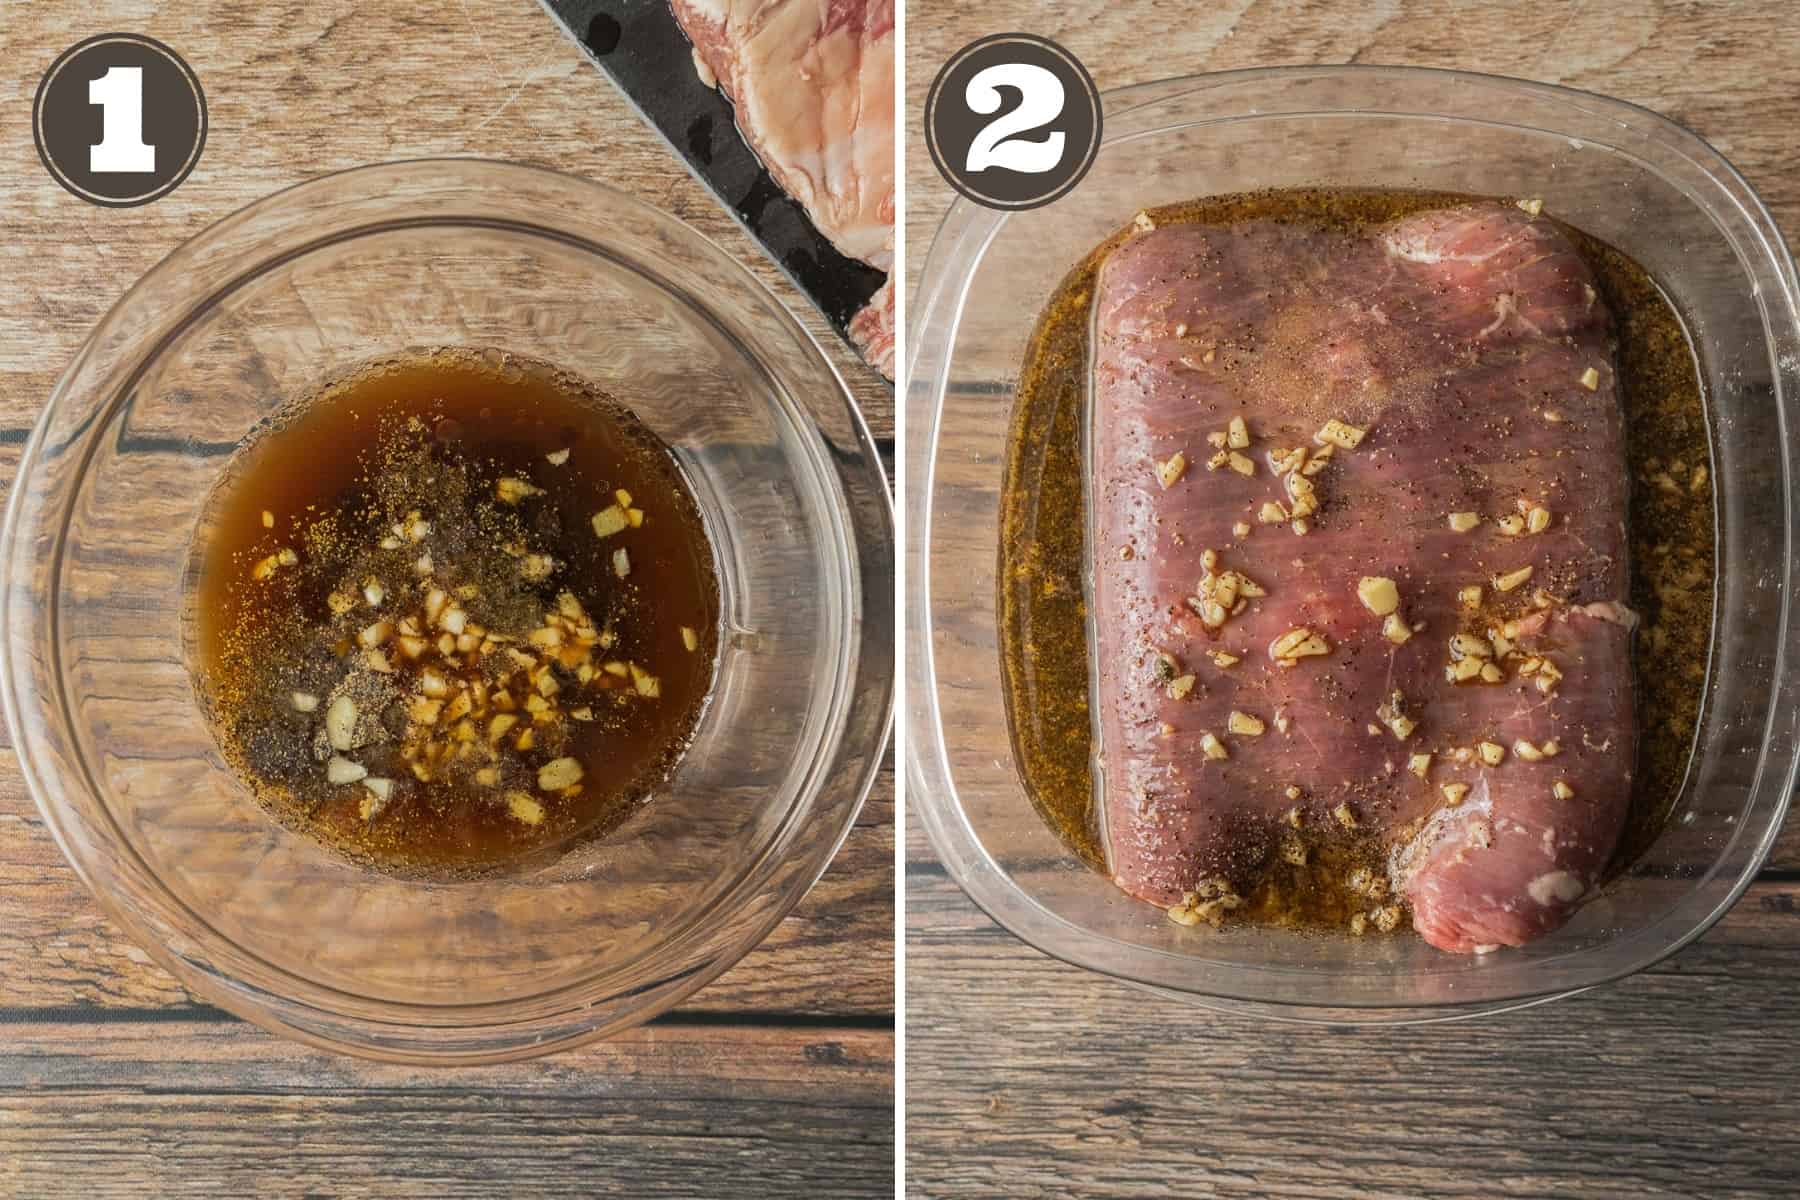 Side by side photos of a bowl of steak marinade and steak marinading in a shallow container.